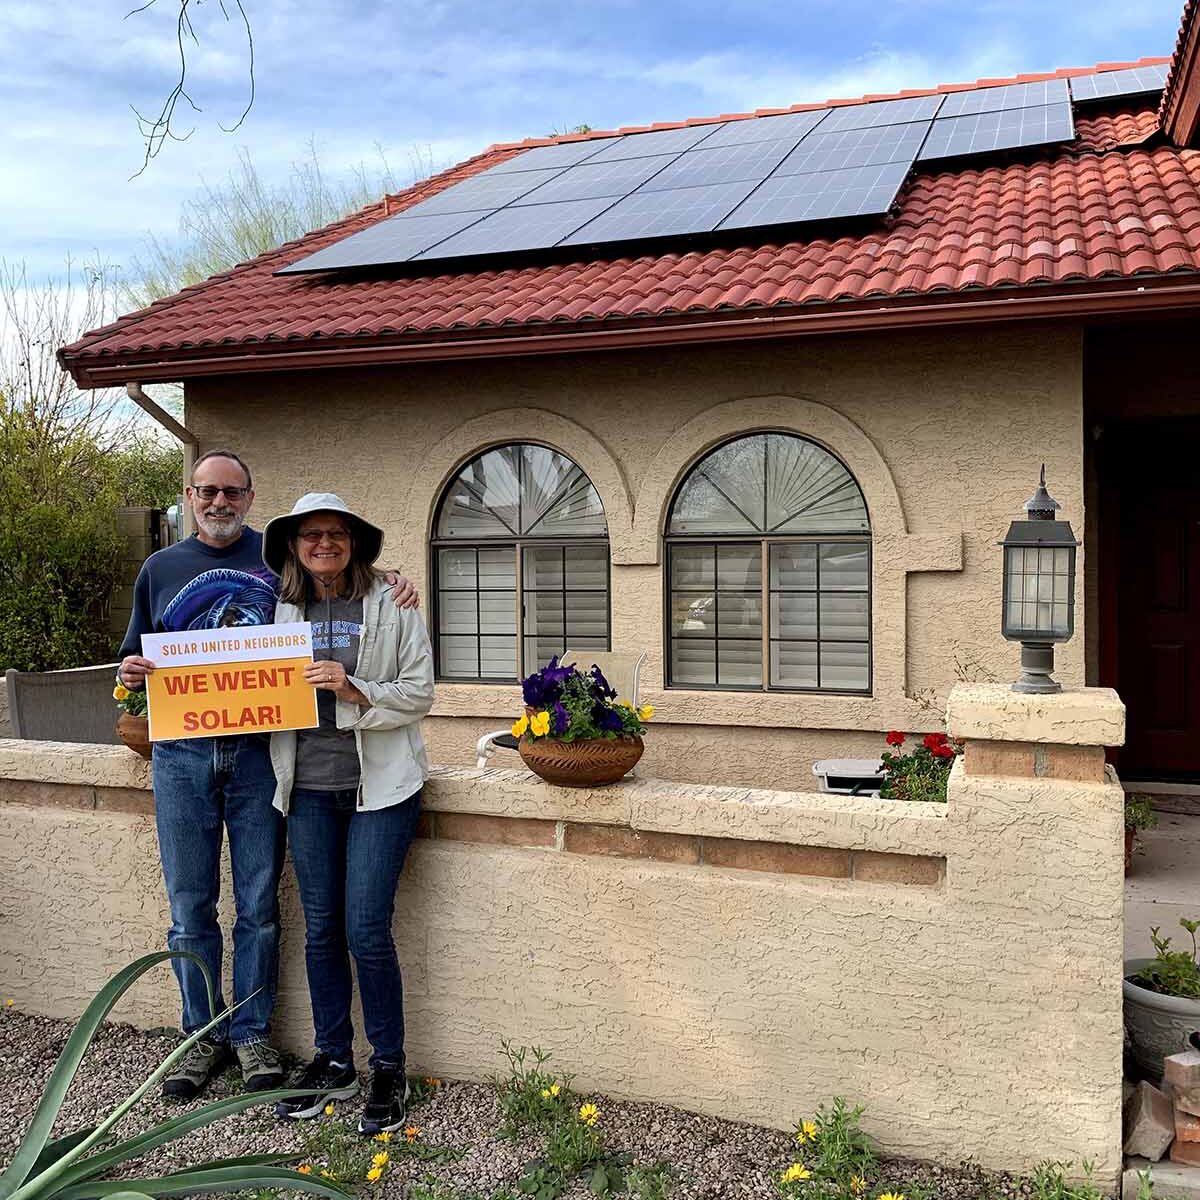 Husband and wife standing in front of home with rooftop solar panels.